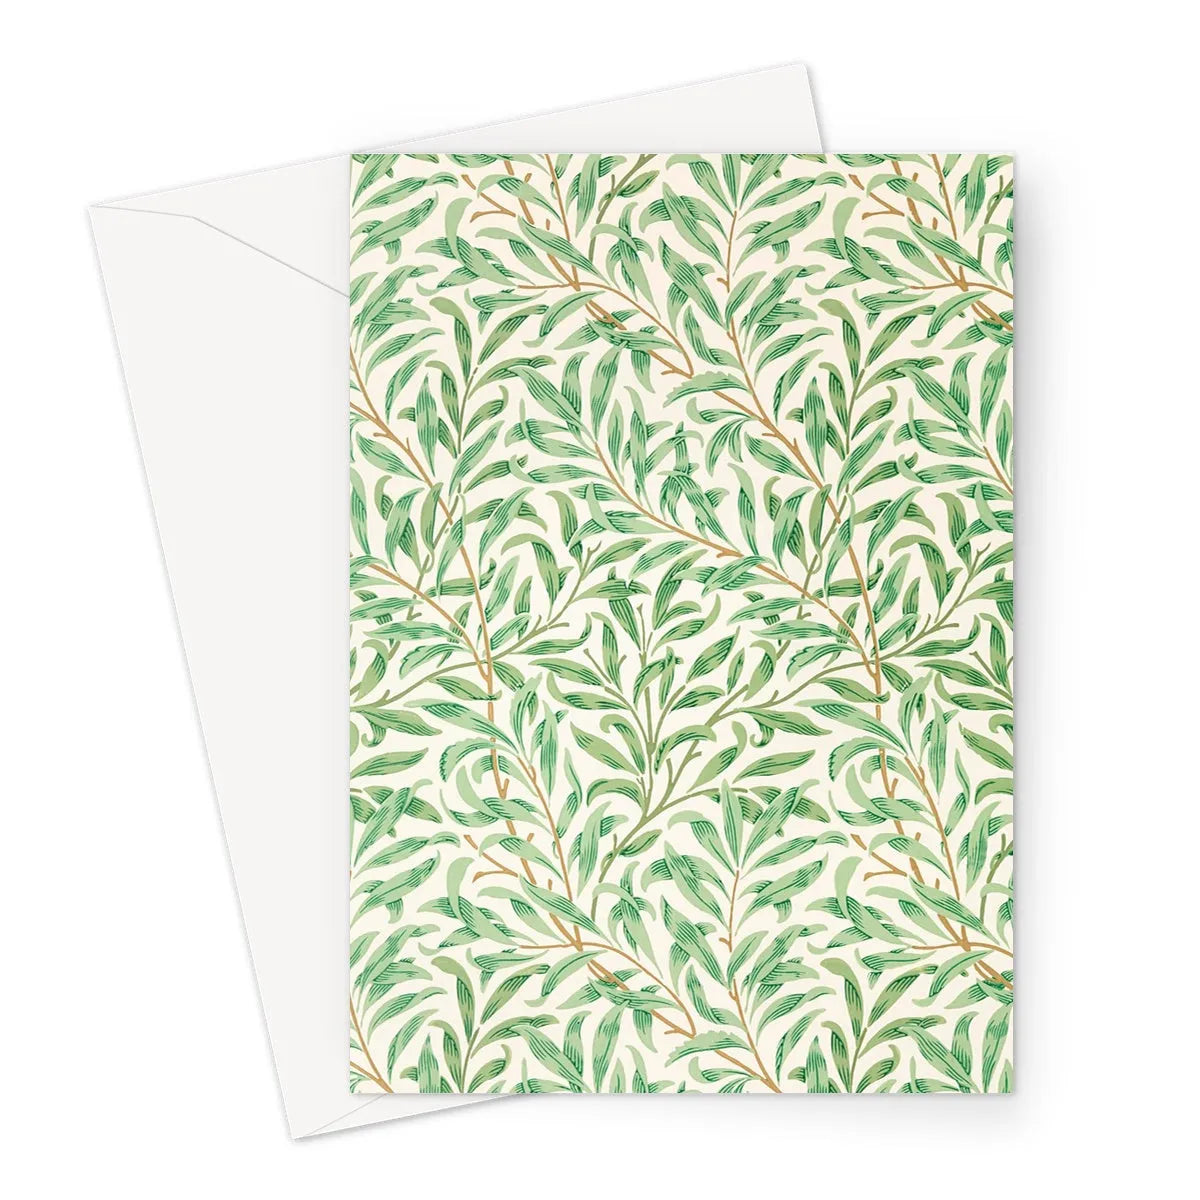 Willow Bough By William Morris Greeting Card - A5 Portrait / 1 Card - Notebooks & Notepads - Aesthetic Art